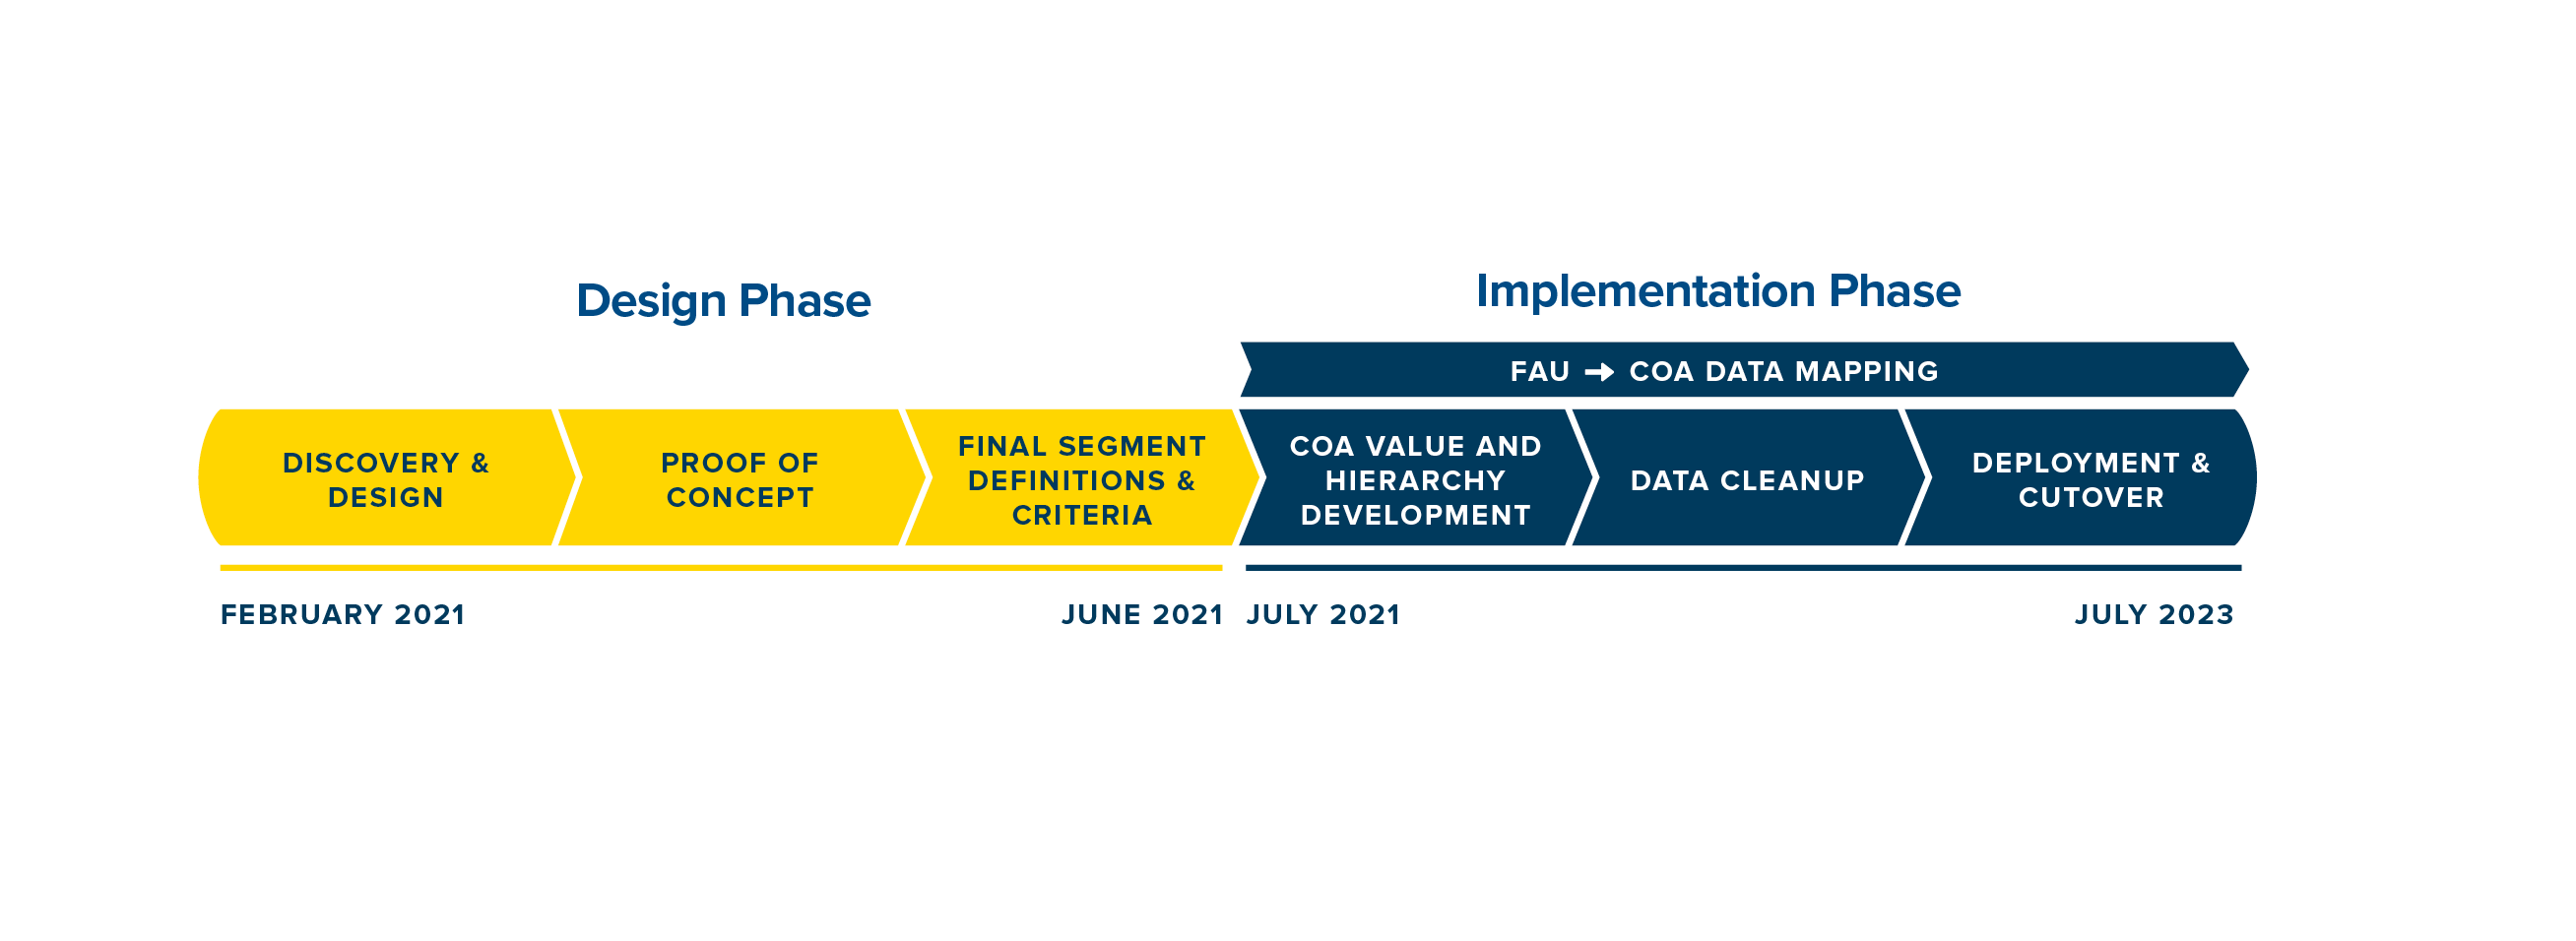 CoA Design and Implementation Phase: discover and design, proof of concept, final segment definitions and criteria, COA value and hierarchy development,Data cleanup, development and cutover